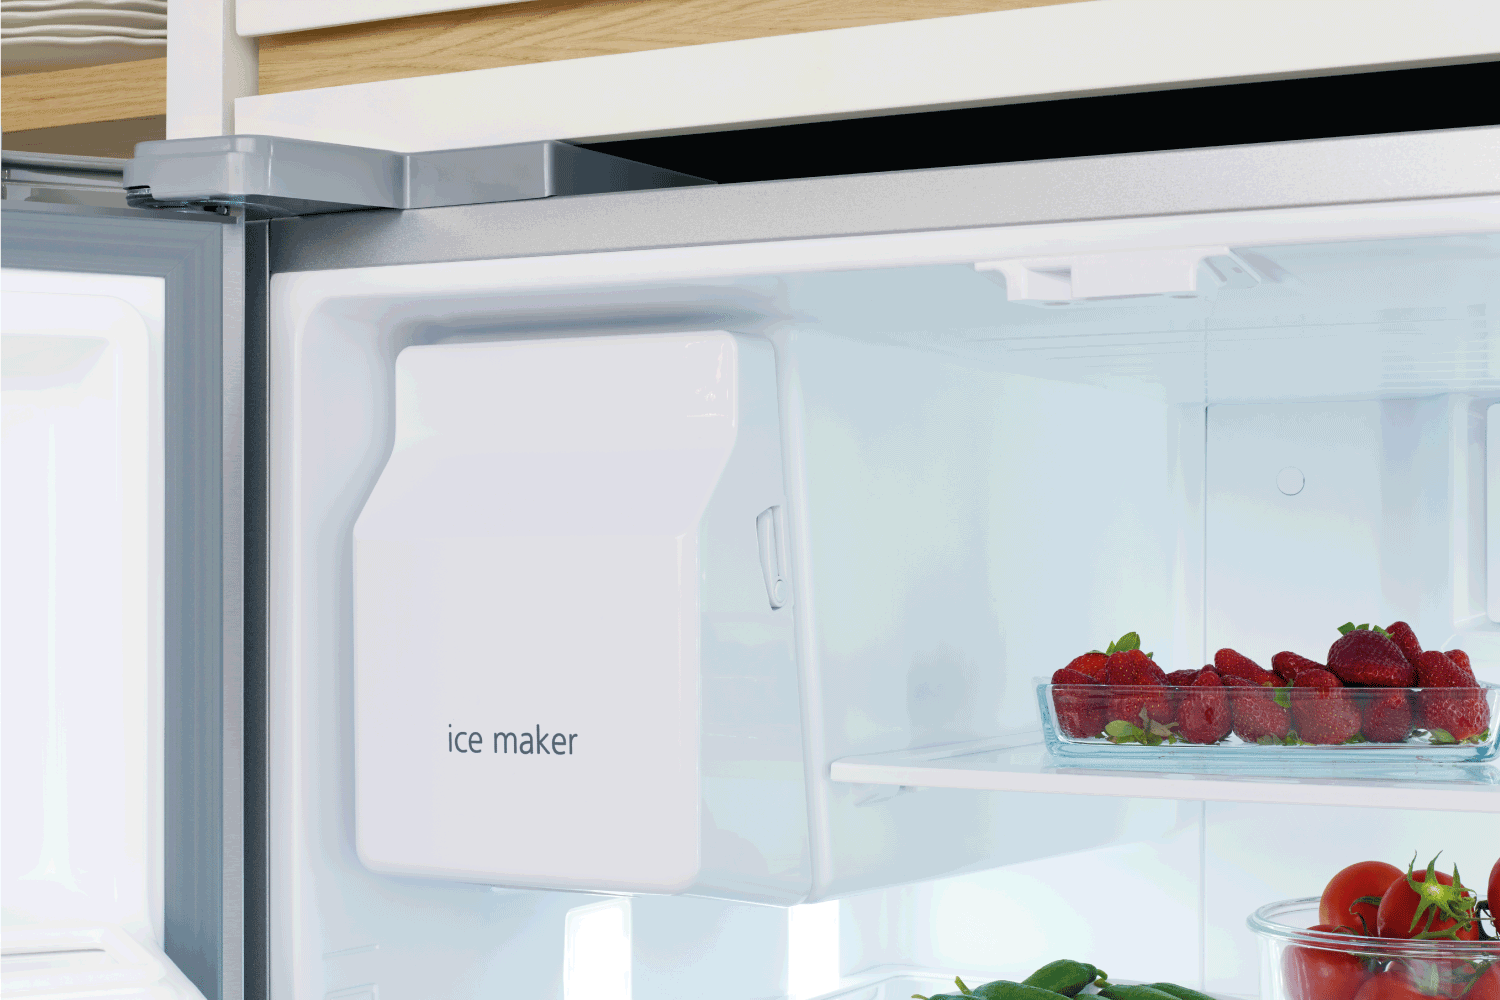 Automatic ice maker in refrigerator